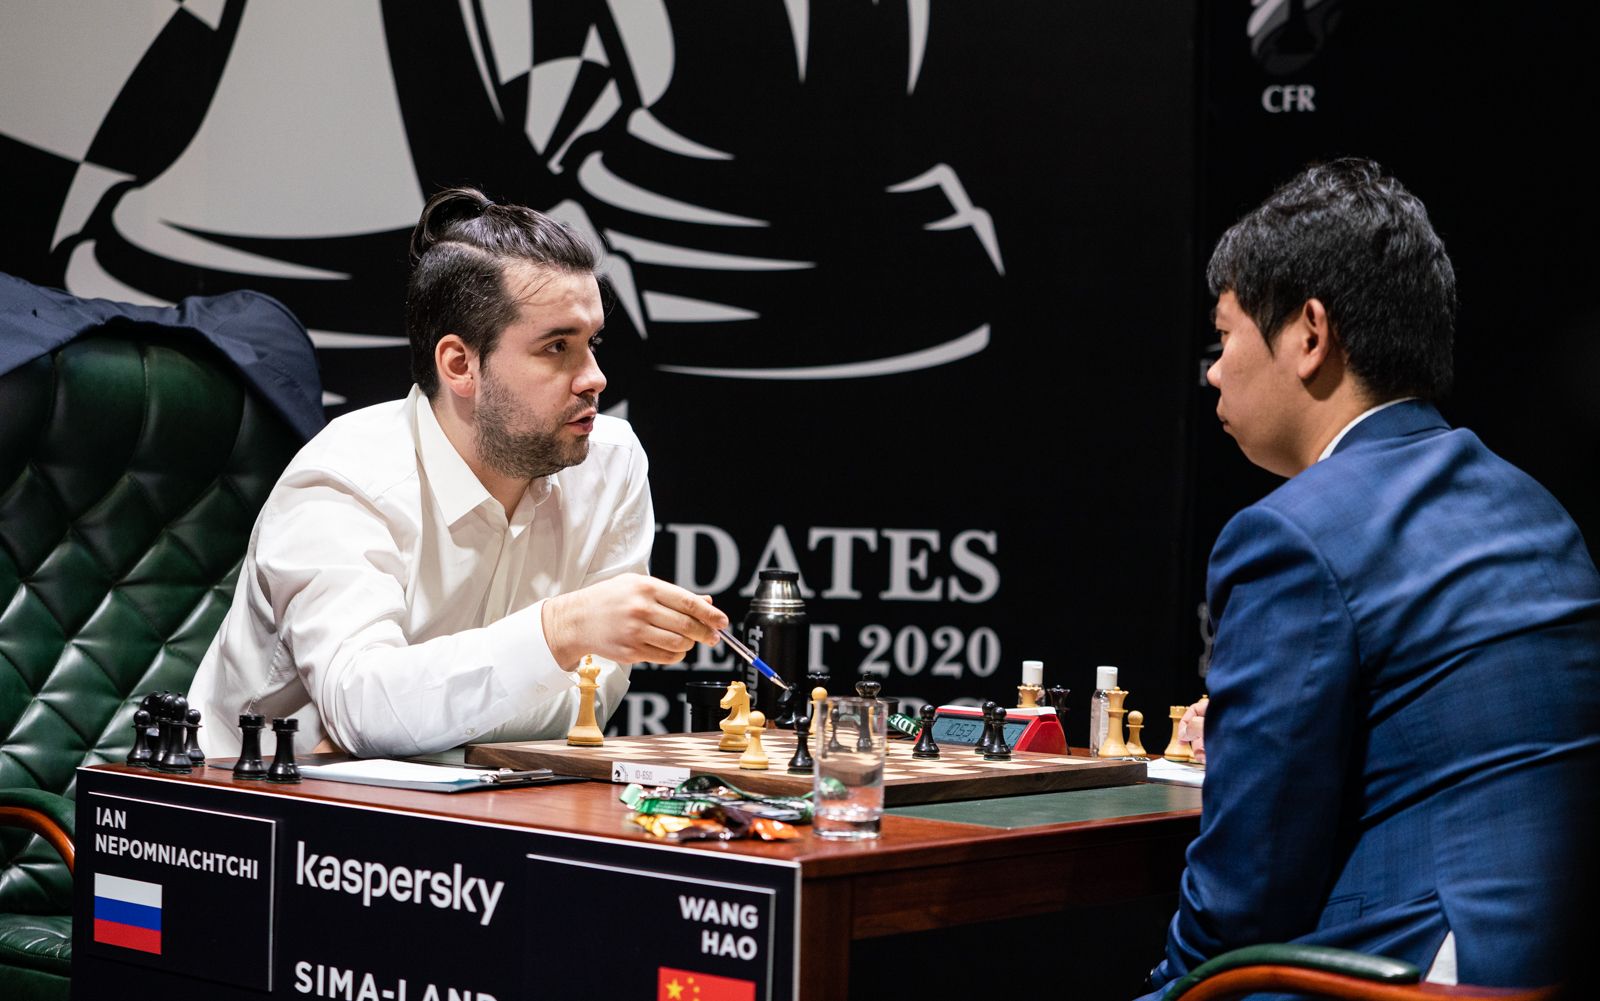 Why are there no Chinese sponsors for the FIDE candidates tournament  despite 2 Chinese players participation, Ding Liren & Wang Hao? - Quora